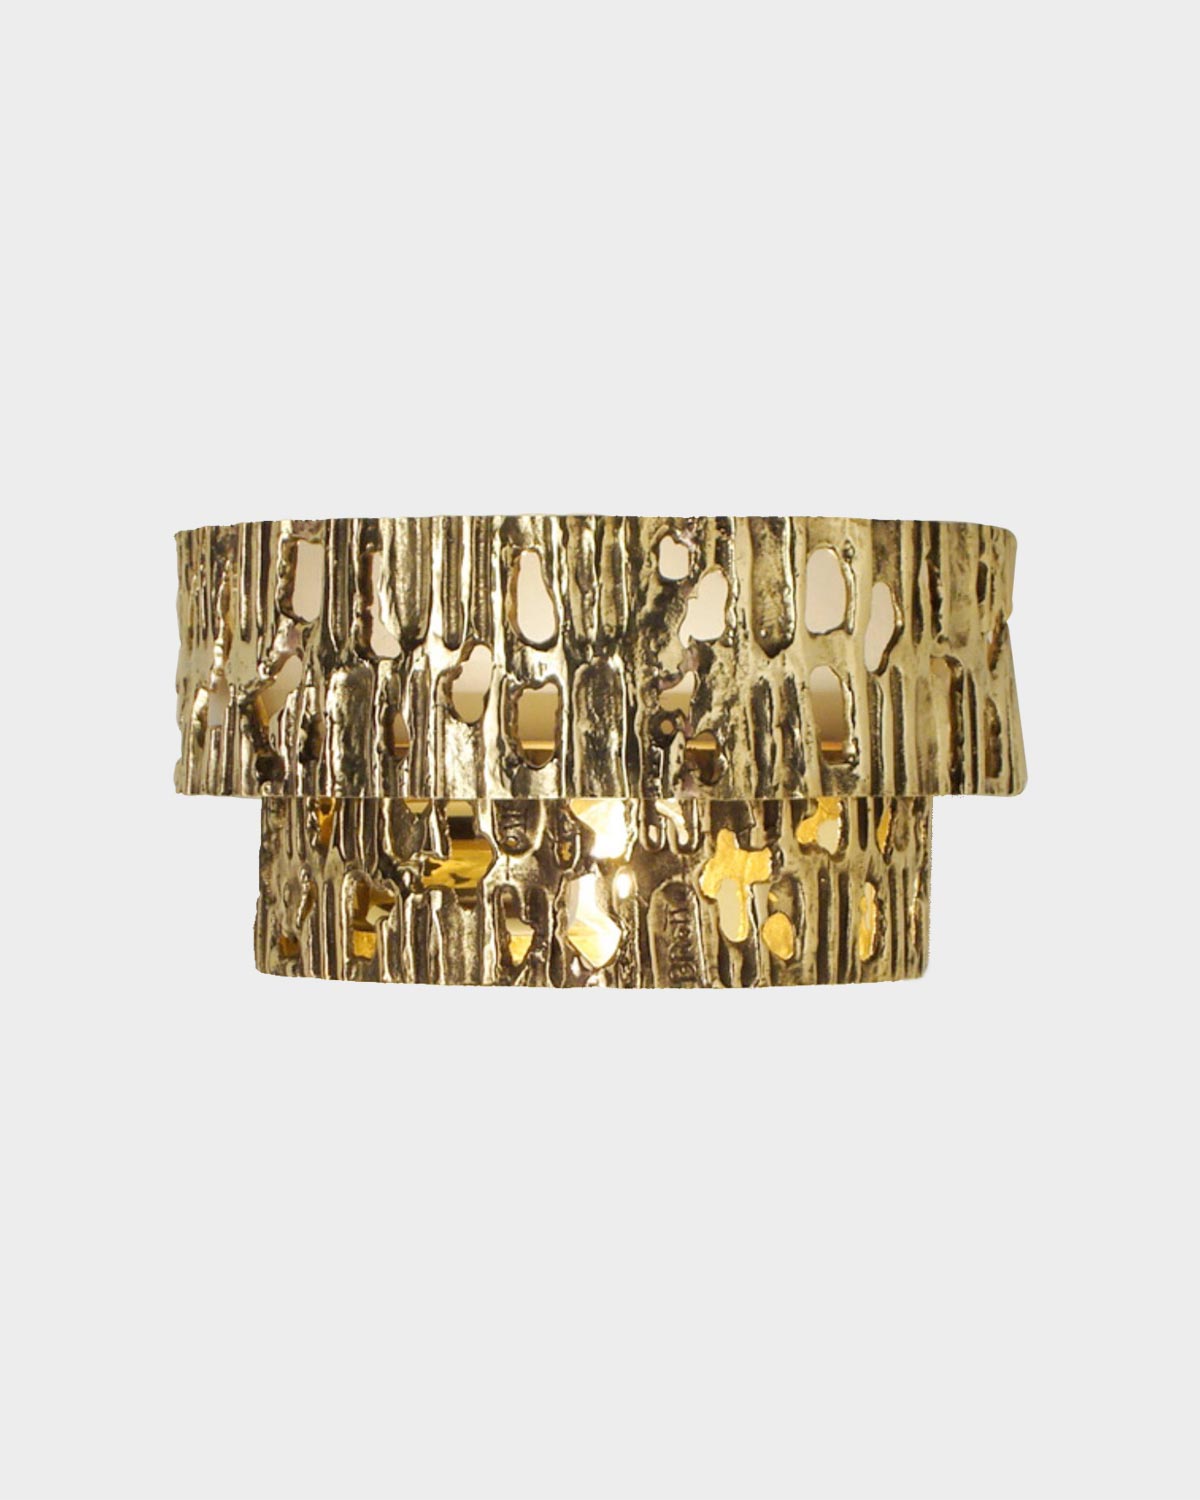 Due Fasce Wall Sconce by Angelo Brotto for Esperia